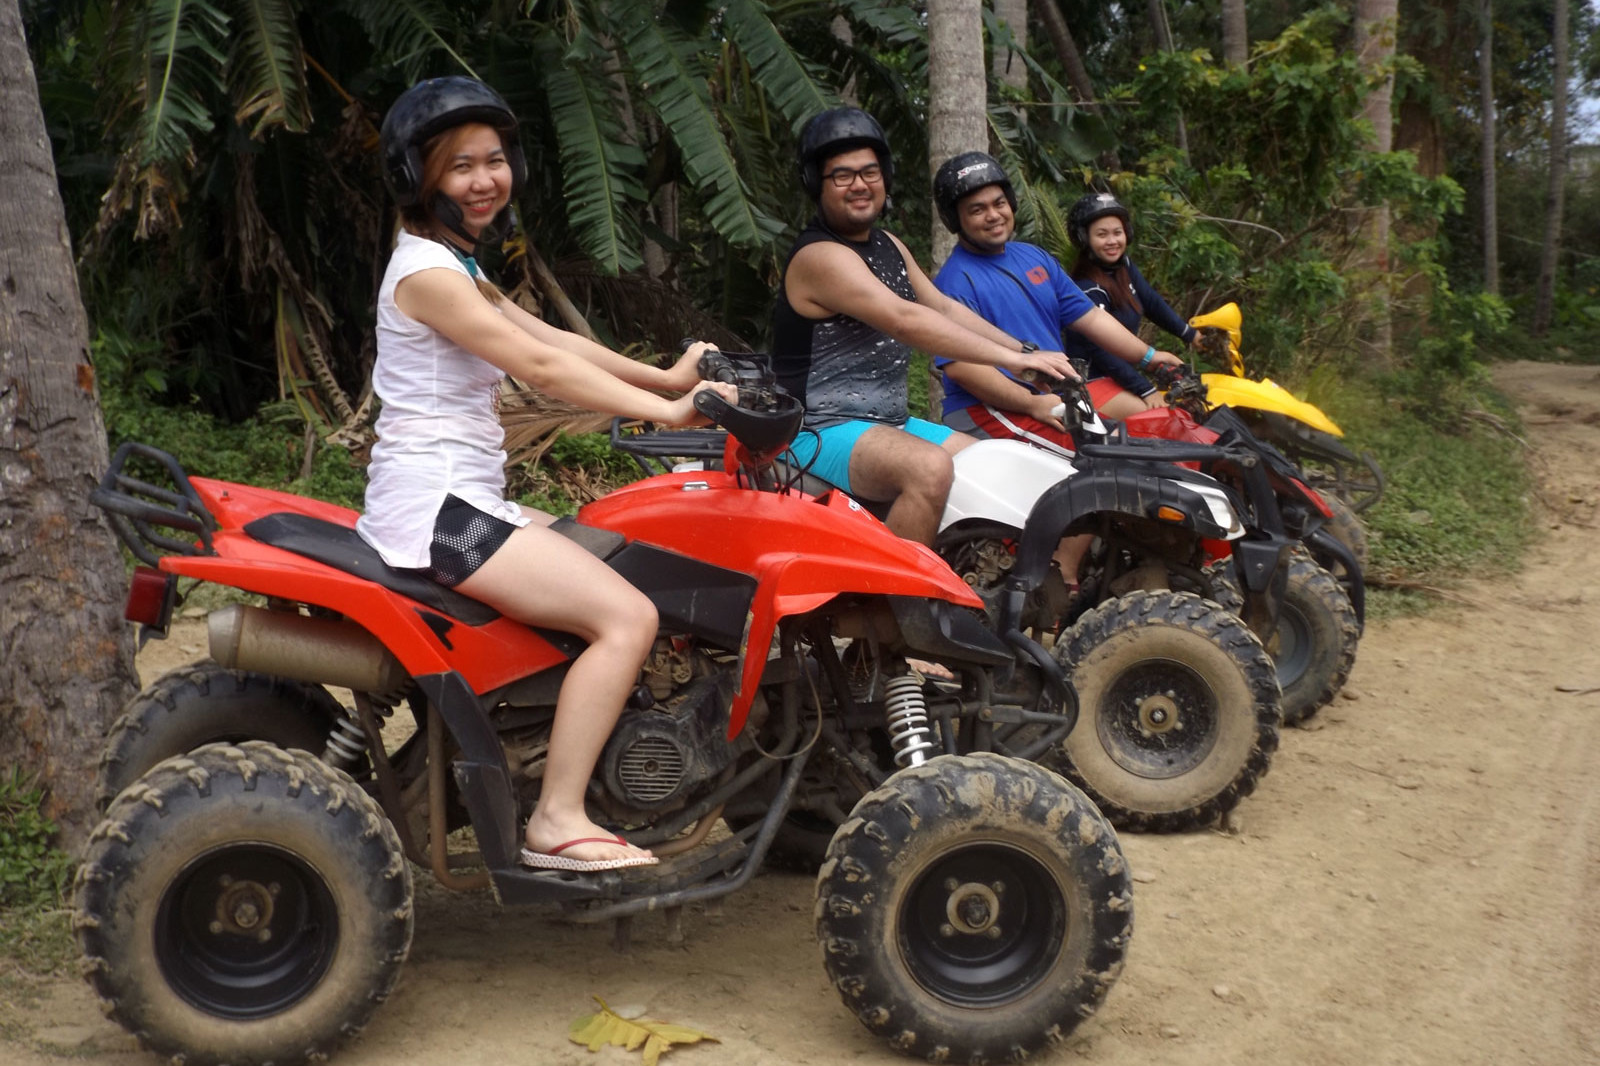 Come and try our ATV's in our off-road track. It is perhaps one of the most heart pumping activities you can find in Puerto Galera, Mindoro.